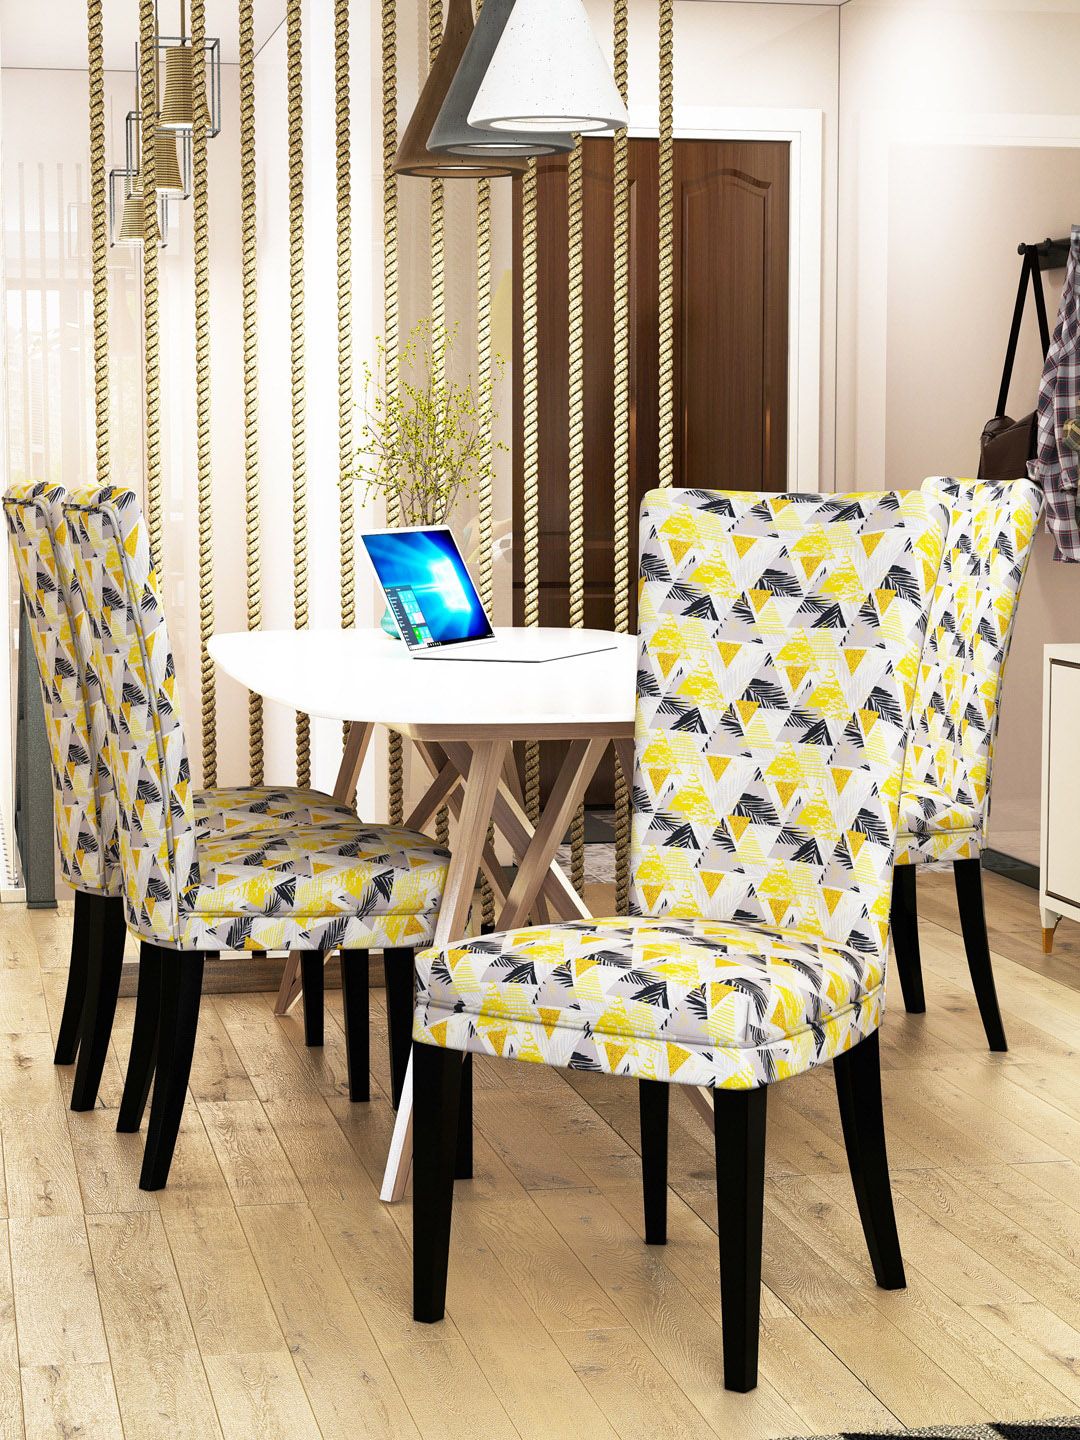 Nendle Set Of 4 Printed Stretchable Dining Table Chair Covers Price in India